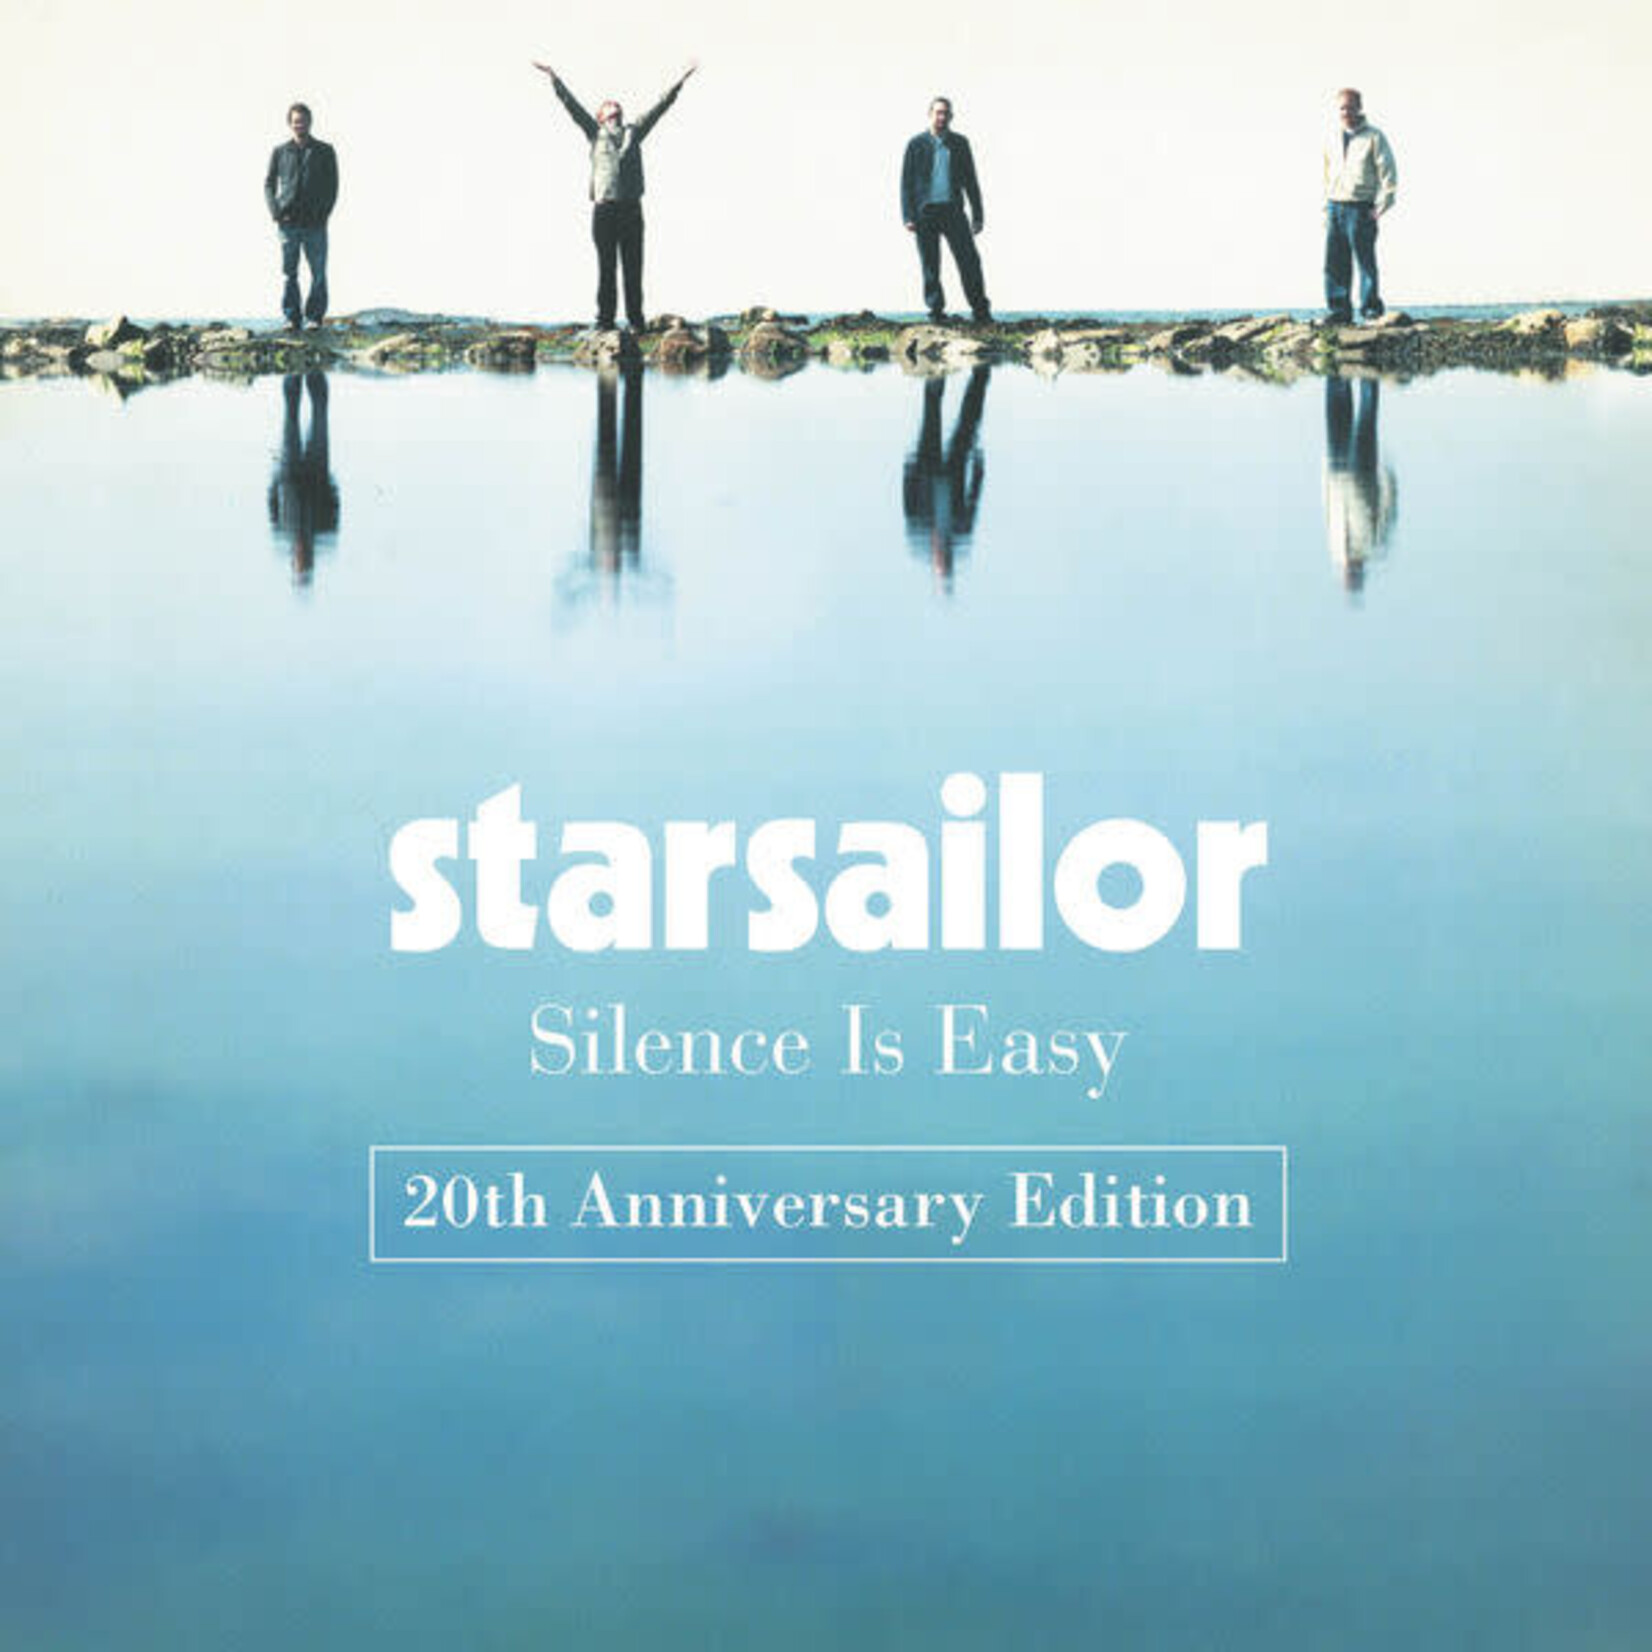 [New] Starsailor - Silence Is Easy (20th Anniversary, turquoise vinyl)